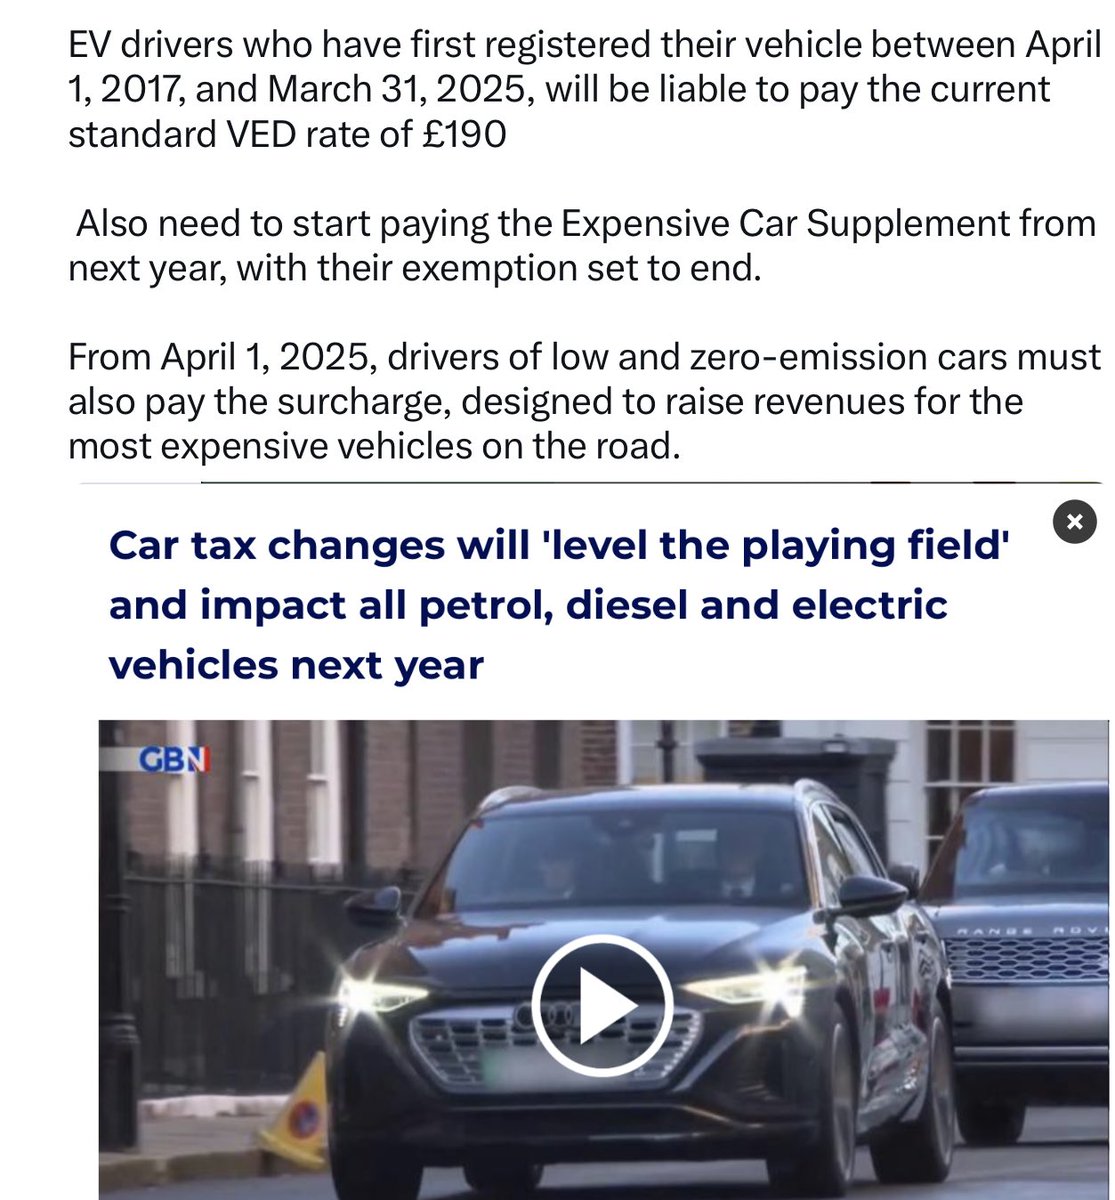 Car tax changes will ‘Level the playing field?’ Fits more with an Agenda of motoring becoming the preserve solely of the rich! gbnews.com/lifestyle/cars…